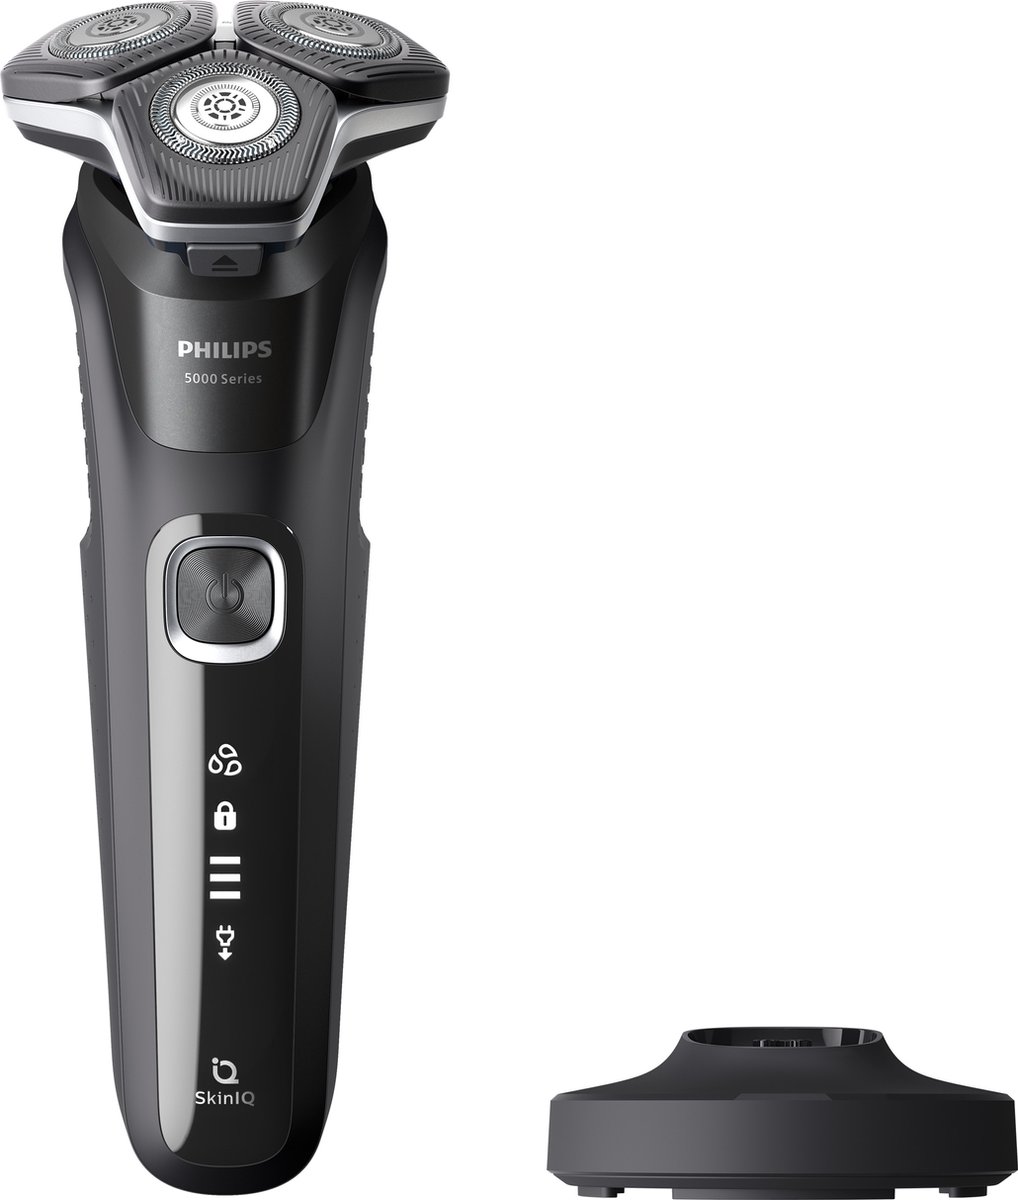 5. Philips Shaver Series 5000 S5898/25